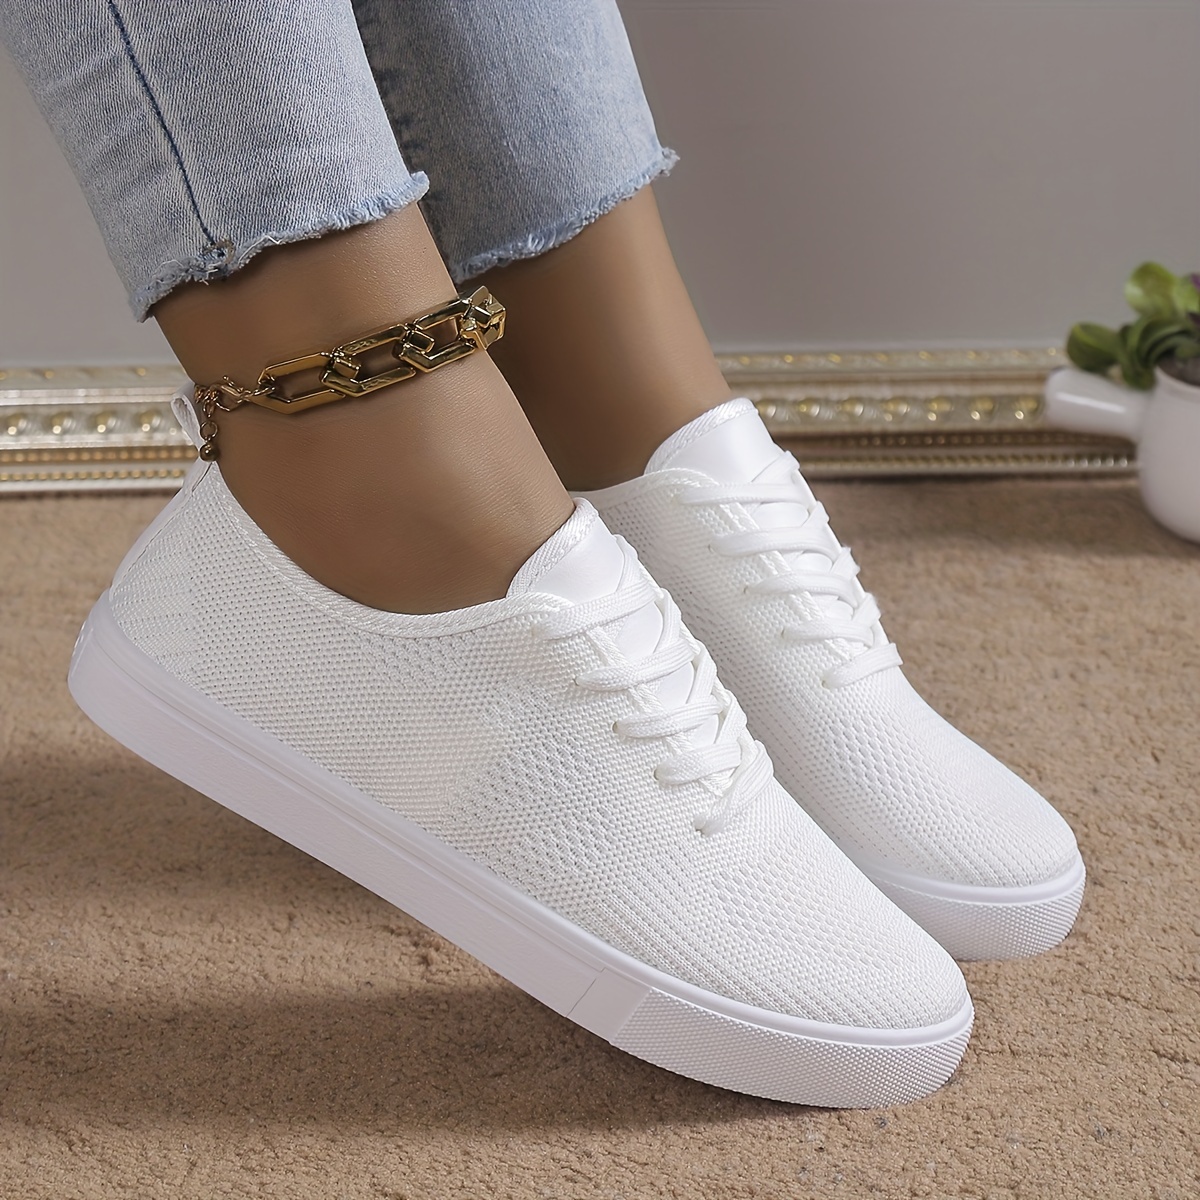 

Women's Whit Knitted Skate Shoes, Breathable Lace Up Loe Top Flat Sneakers, Comfy Walking Shoes